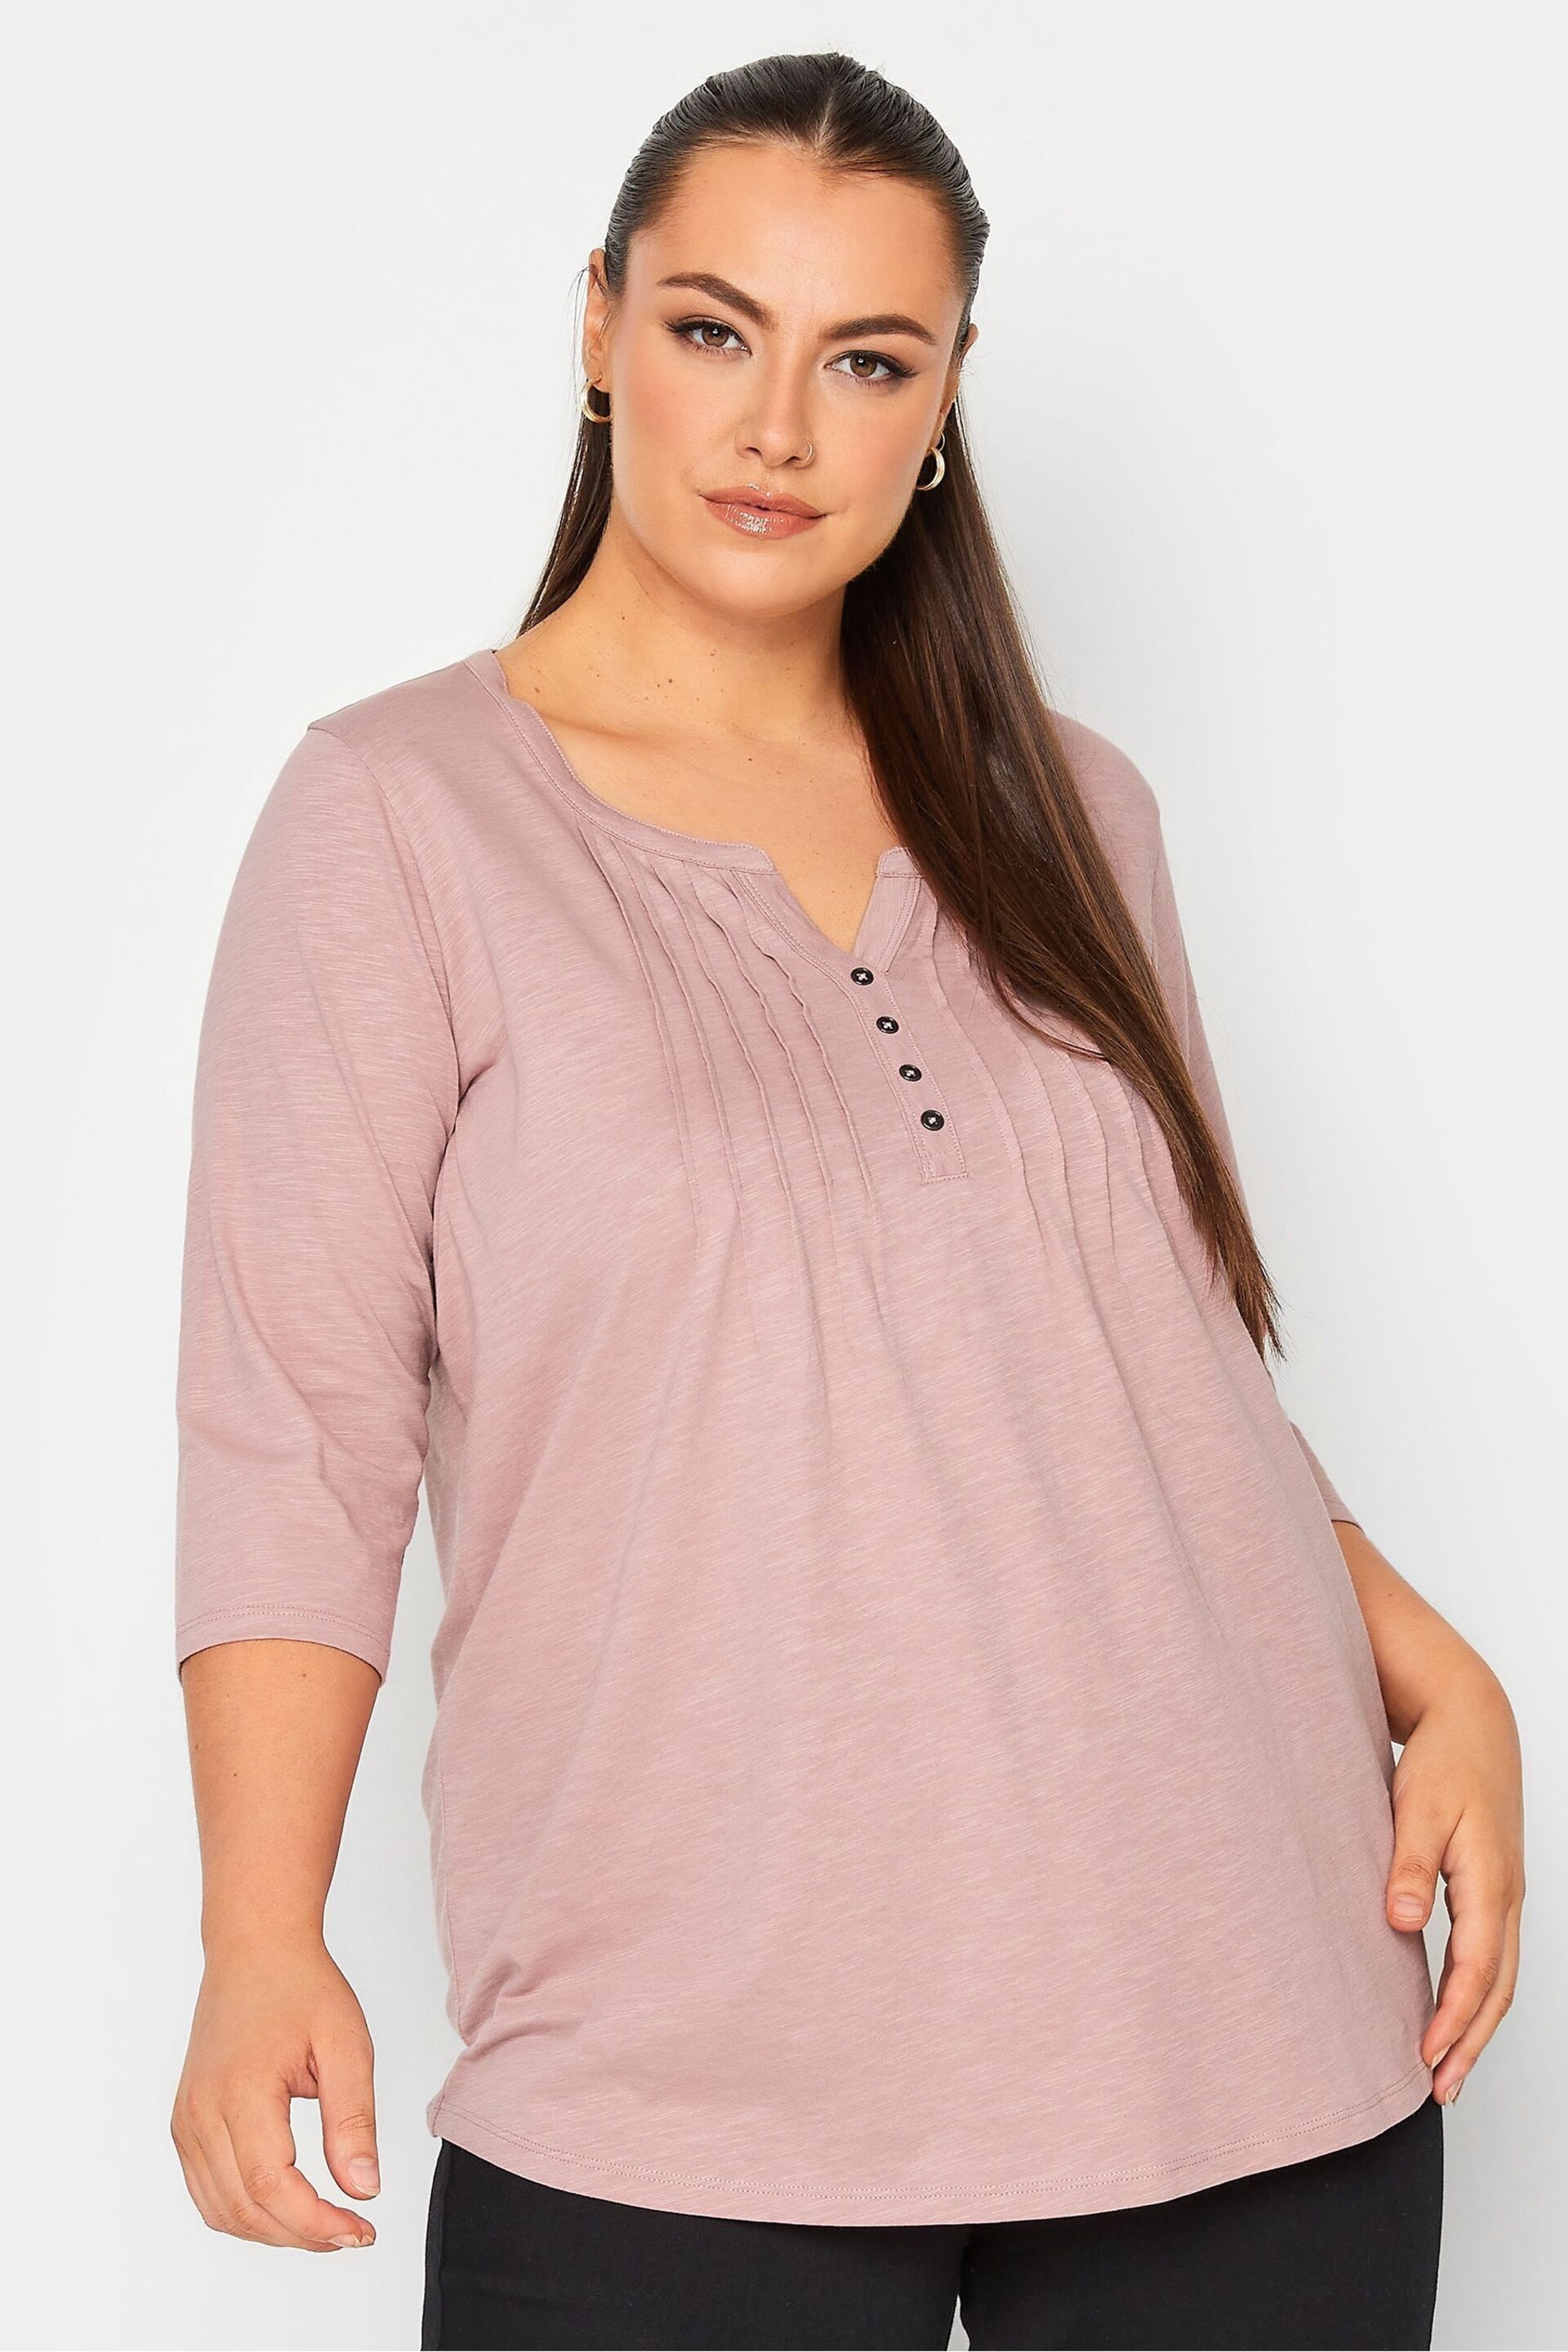 Yours Curve Pink Pintuck Henley Top - Image 1 of 4